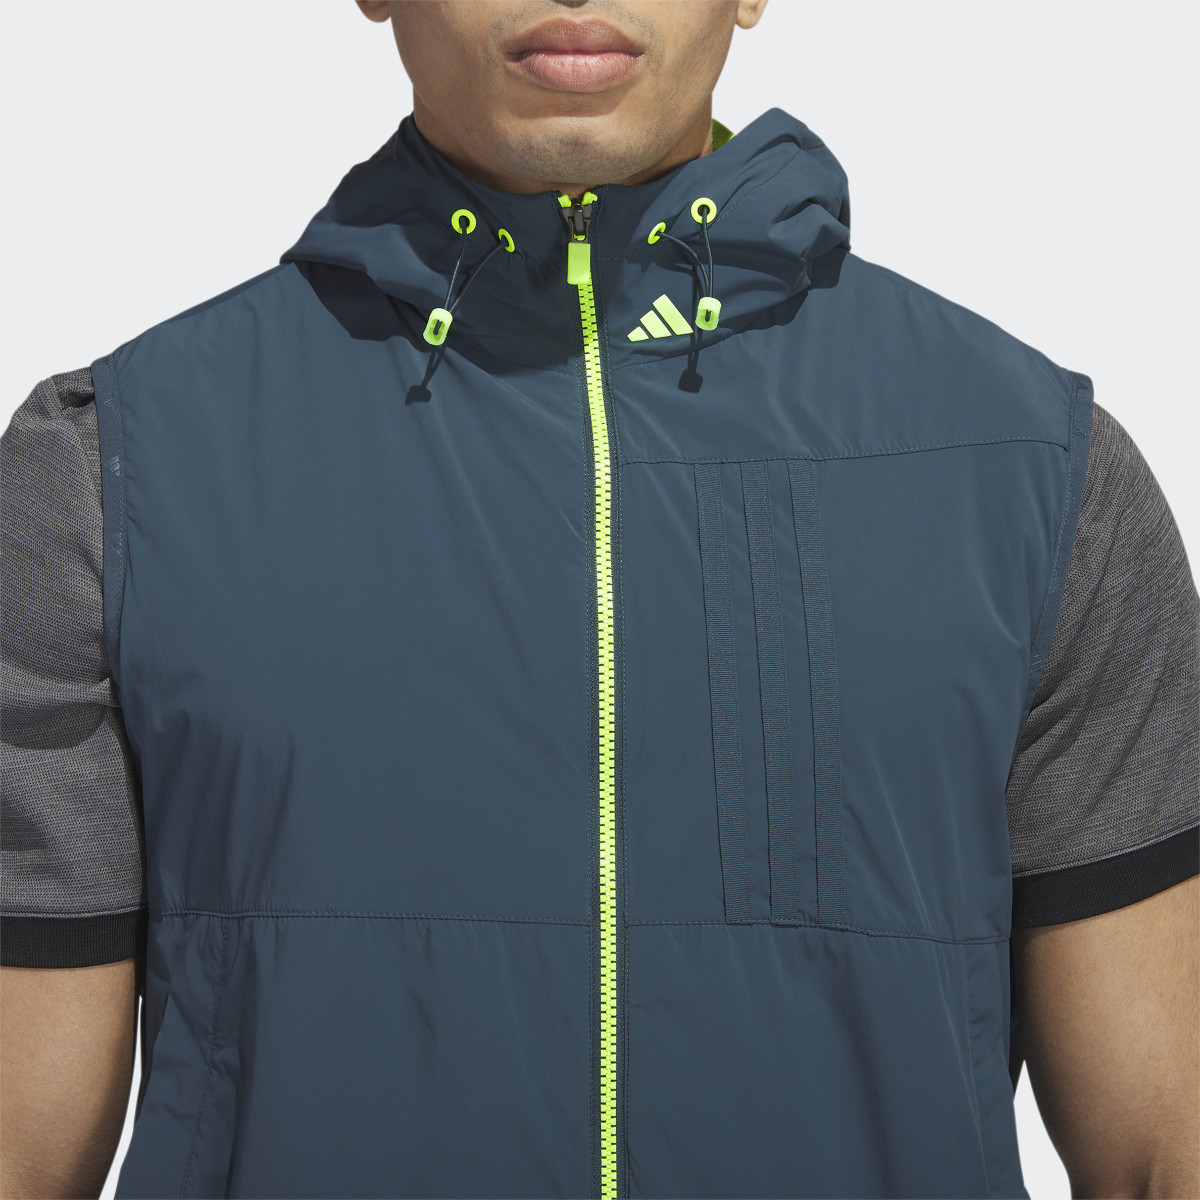 Adidas Ultimate365 Tour WIND.RDY Vest. 7